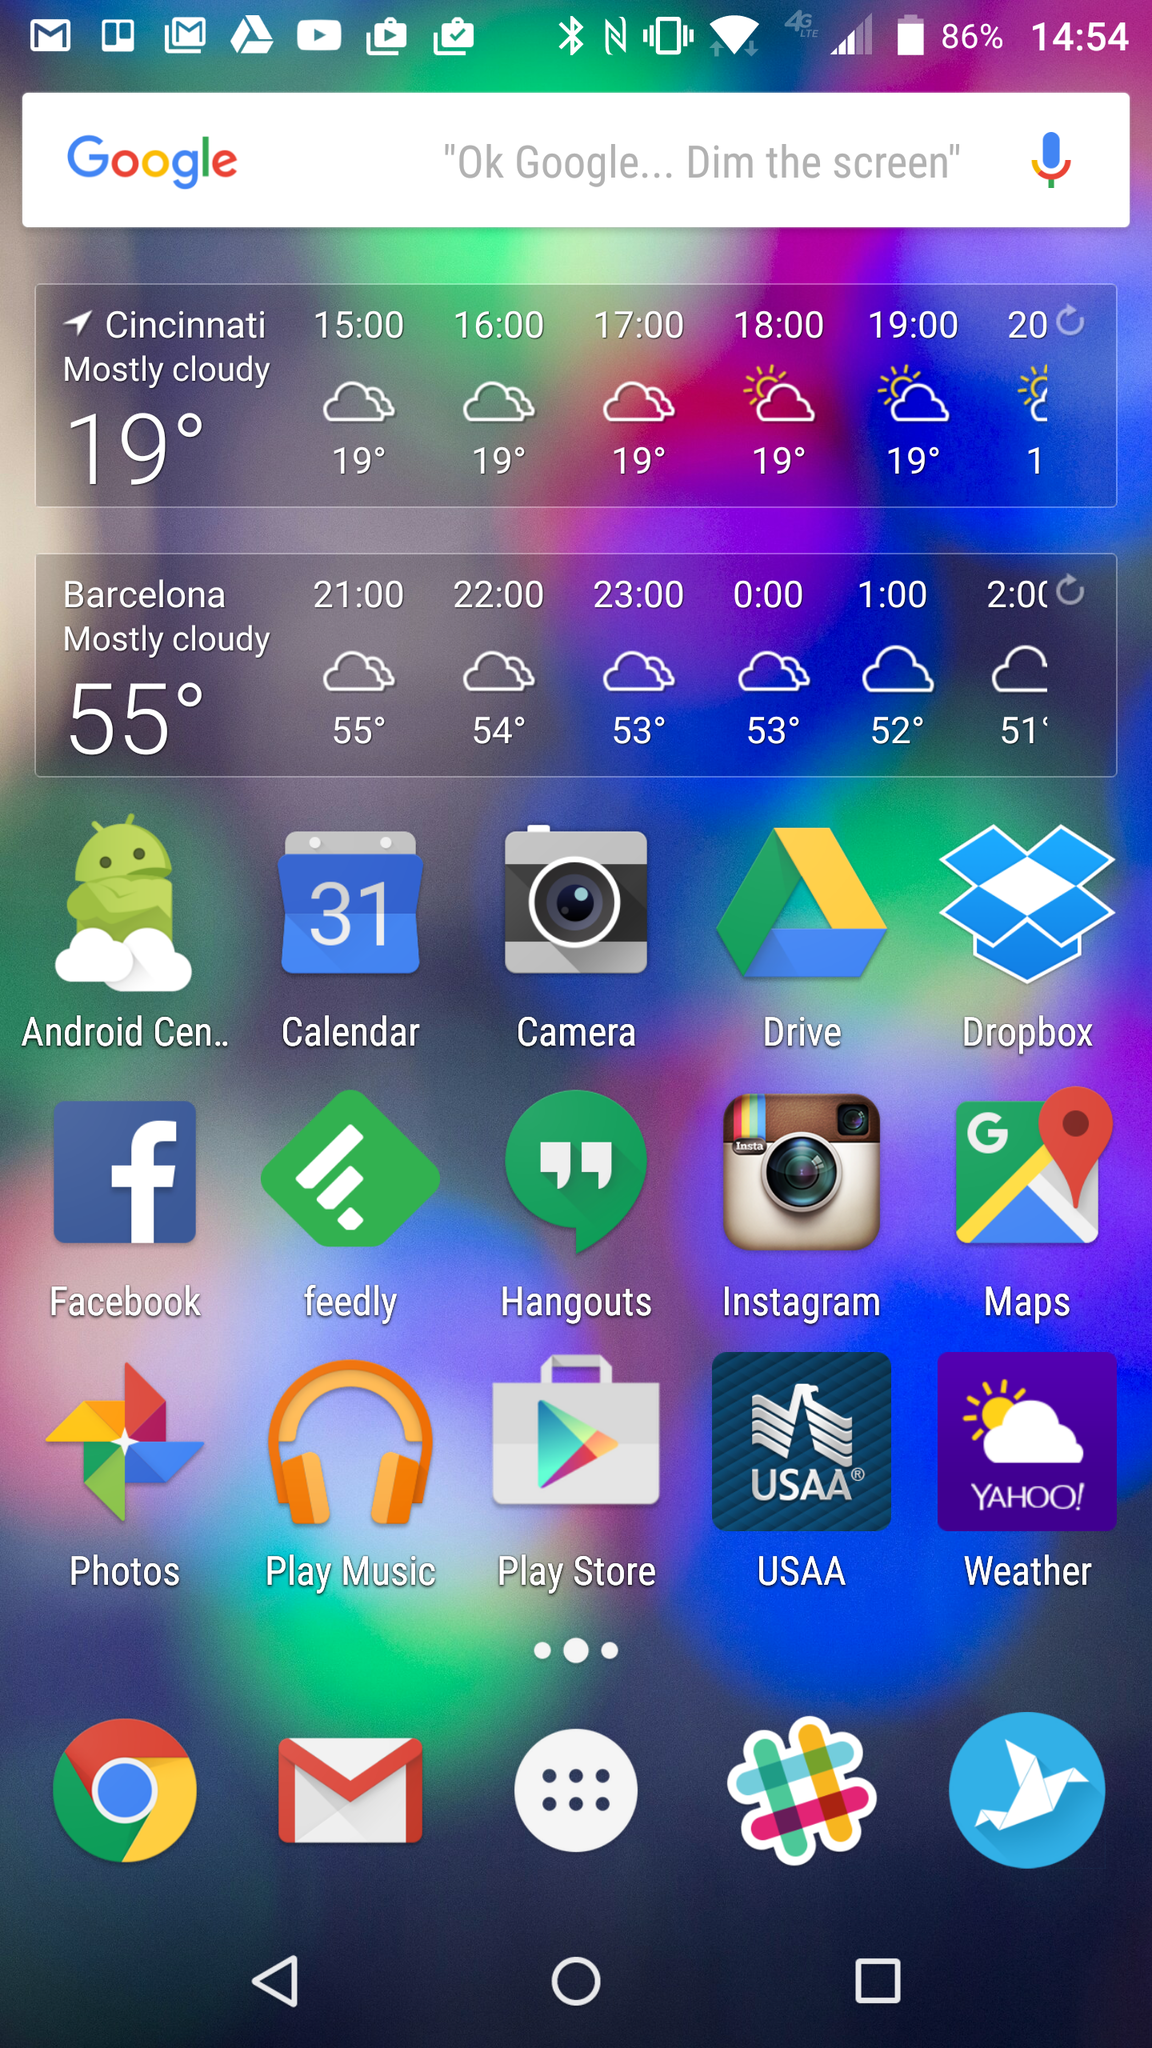 Home screen layouts and how to theme them | Android Central